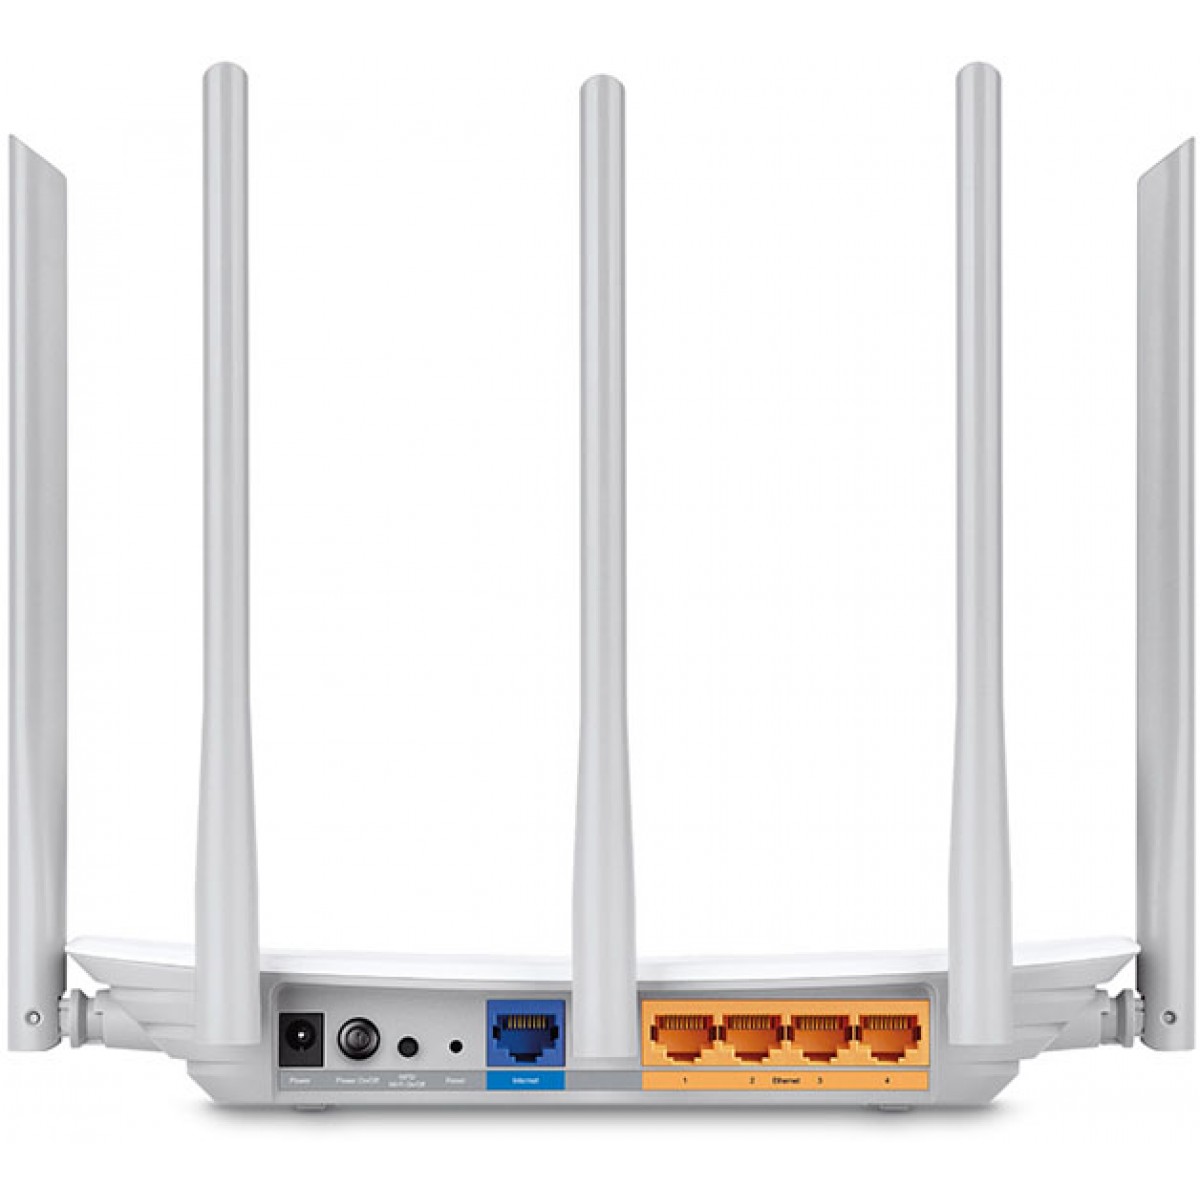 Roteador Wireless TP-LINK Archer C60 Dual-Band Wireless AC1350 5GHz 867Mbps 802.11ac